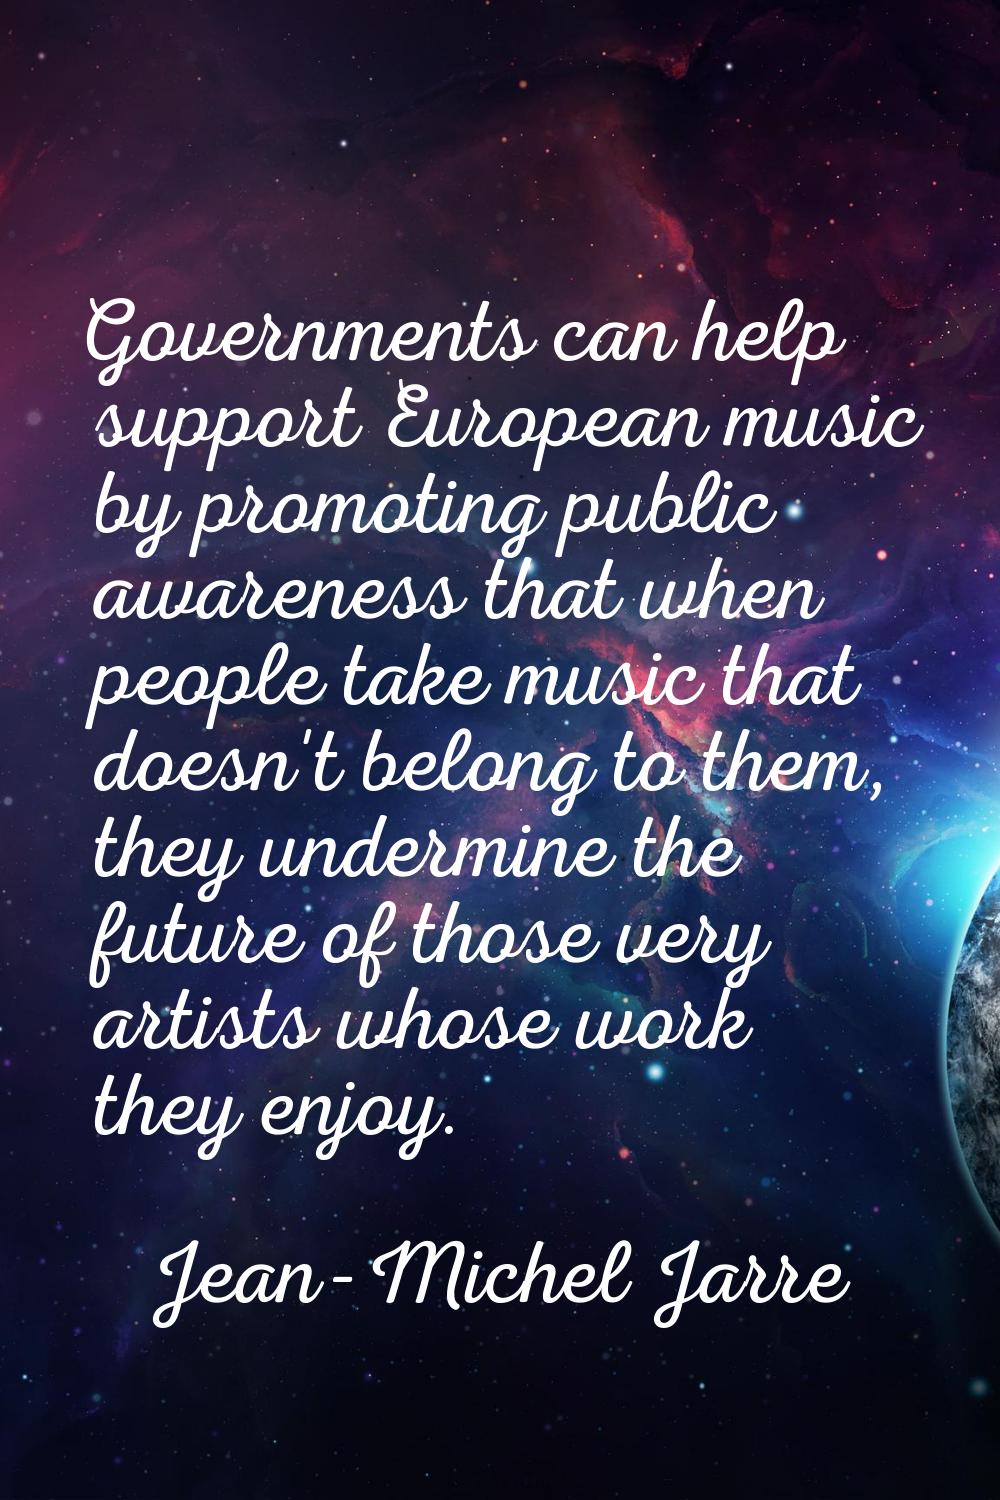 Governments can help support European music by promoting public awareness that when people take mus